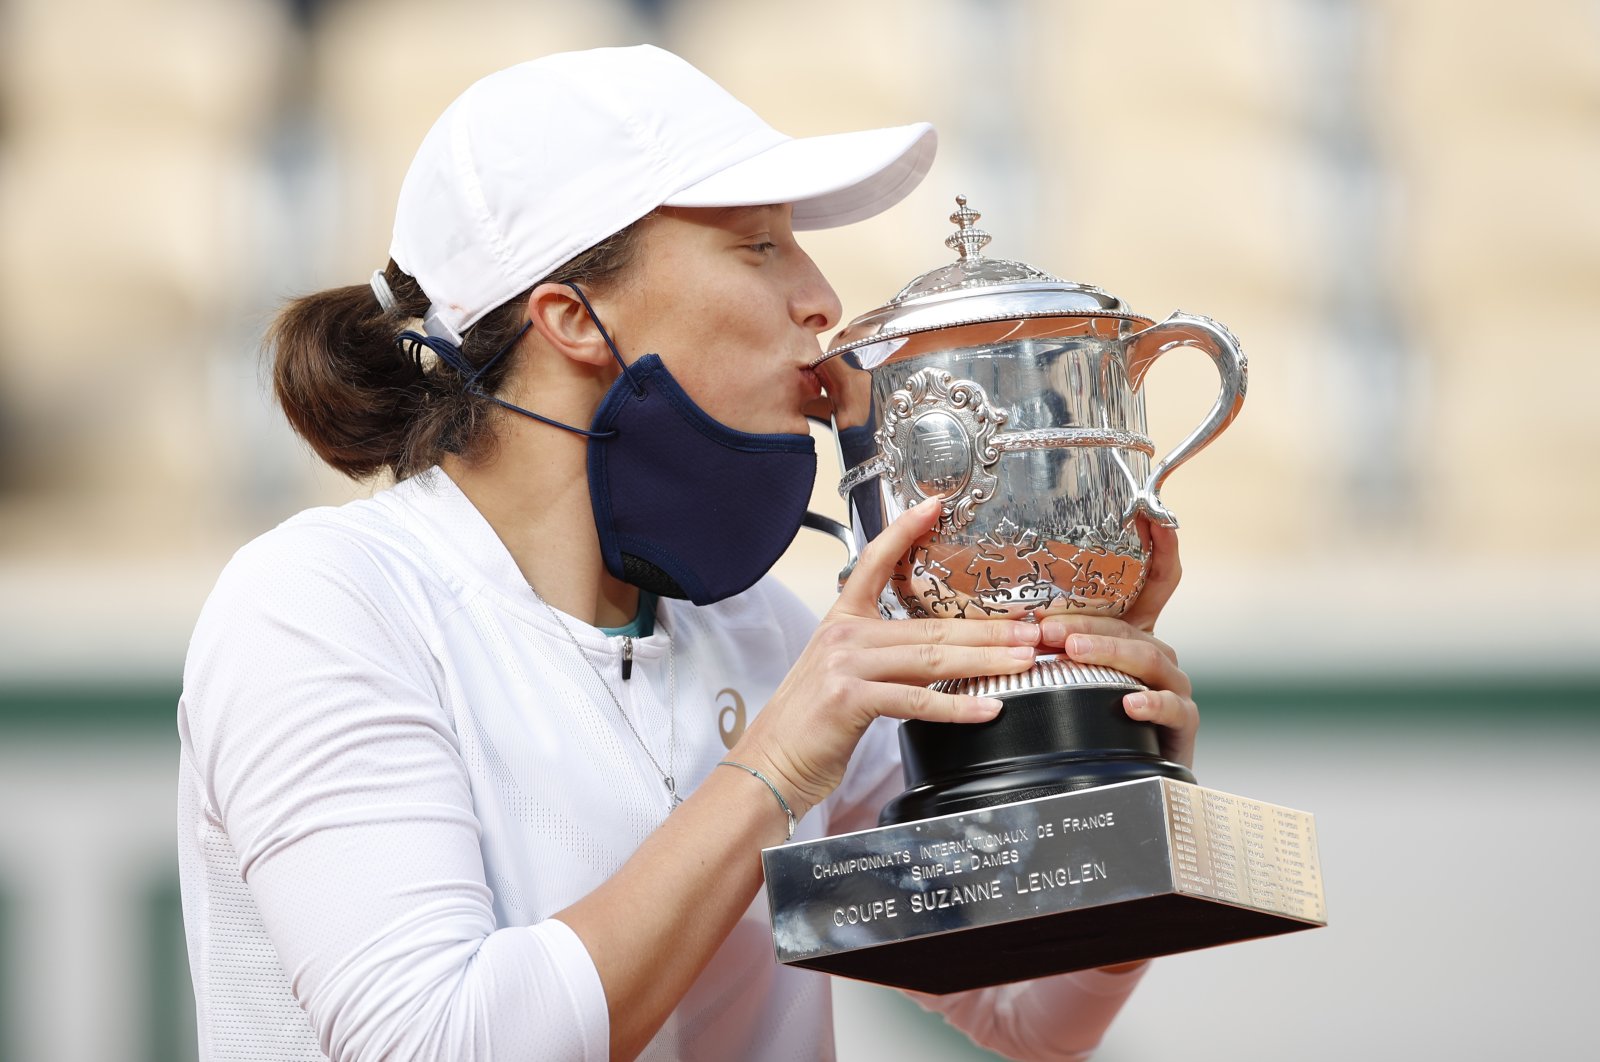 Poland's Iga Swiatek kisses the trophy as she celebrates after winning the French Open at Roland Garros, Paris, France, October 10, 2020. (Reuters Photo)